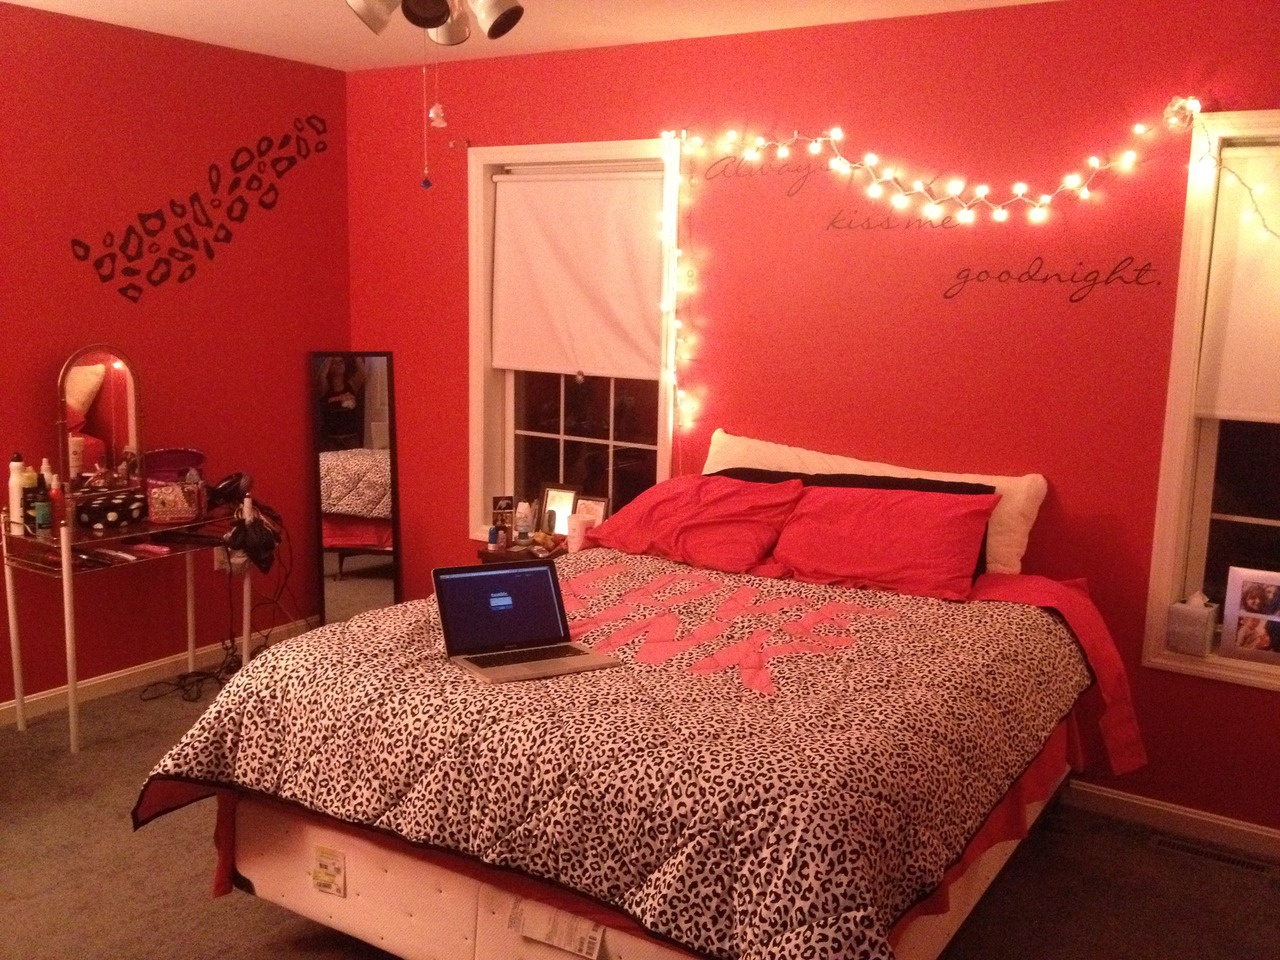 Cheetah And Red Bedroom Decorations